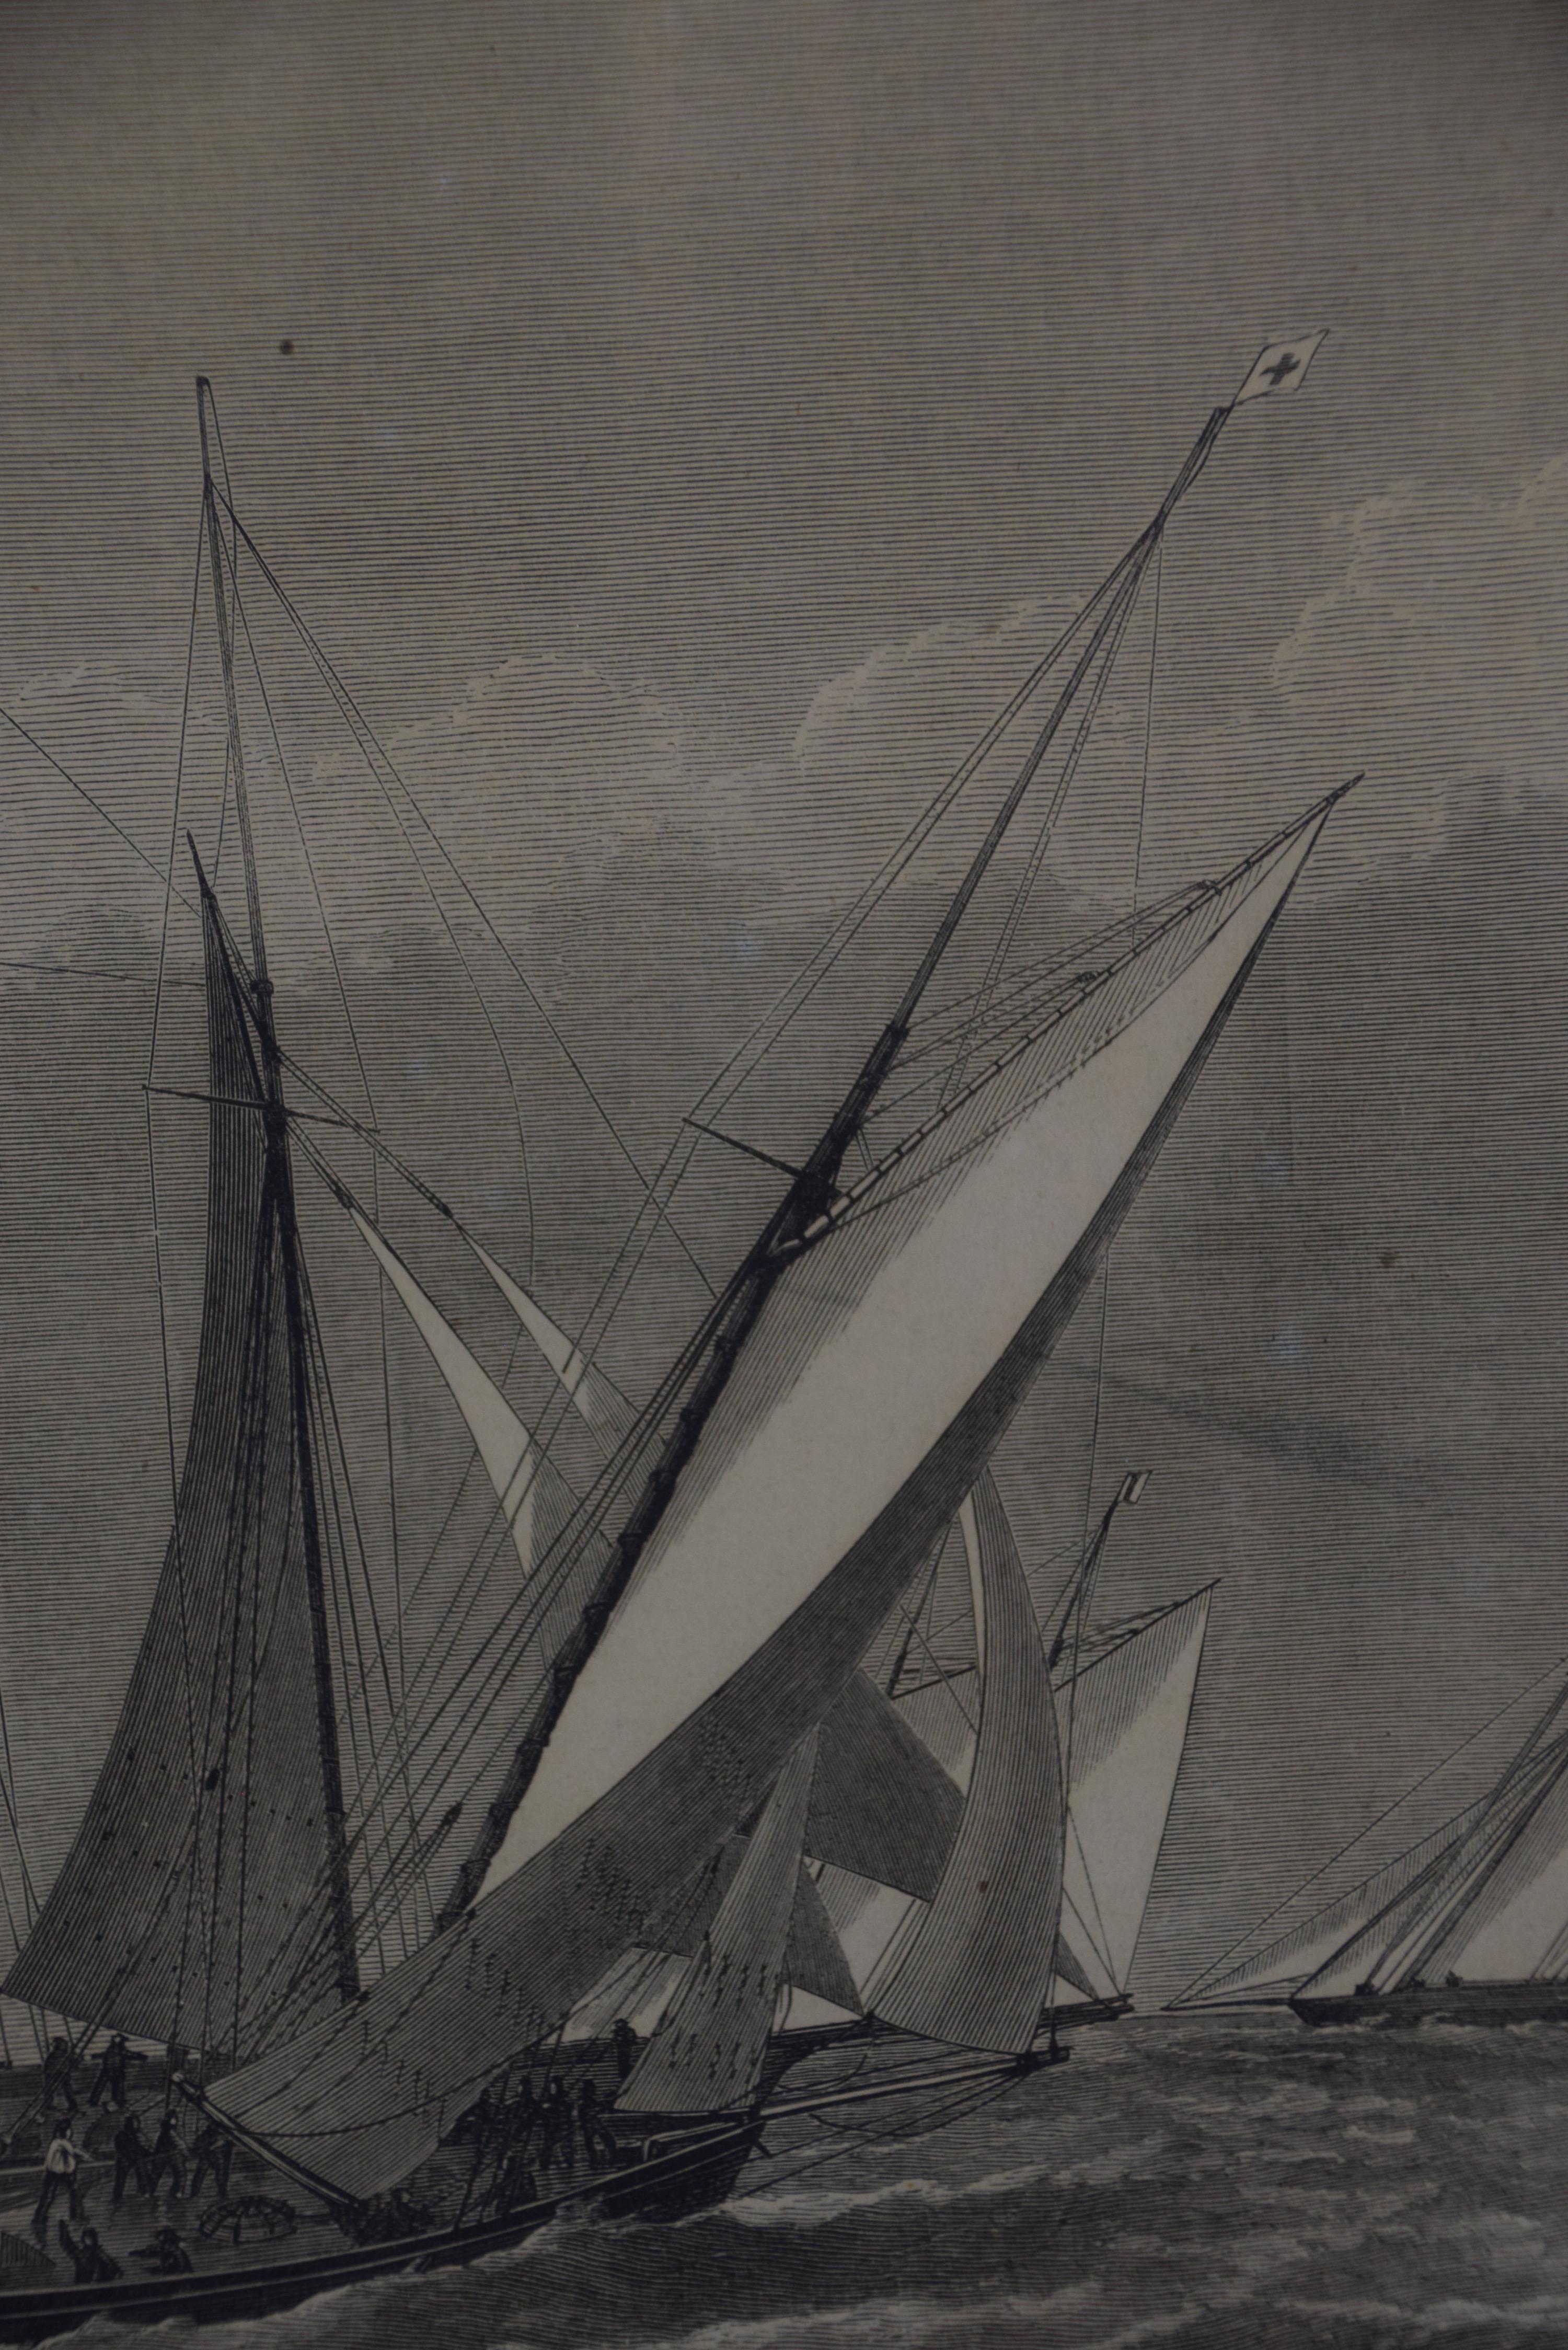 This is a set of three woodcut engravings produced in 1885 to commemorate the sailing yacht trials competition to determine the team to represent the United States in the America's Cup races off the New Jersey coast in that same year.

These three